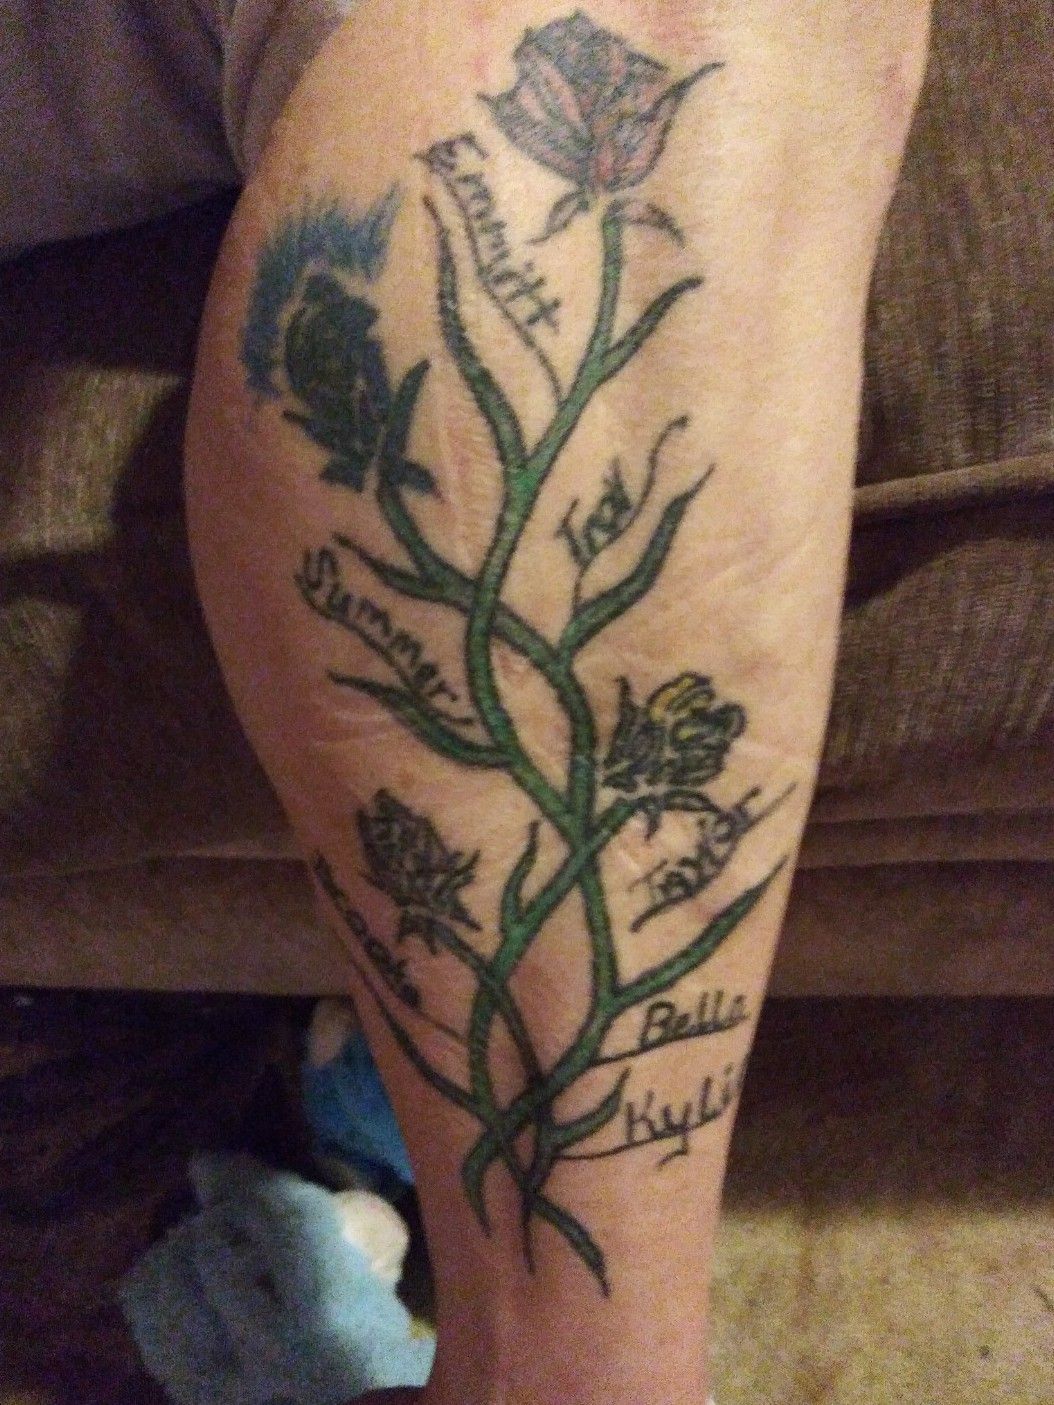 A tattoo I did to signify all the grandparents involved in their grandkids  life ltattoos on IG  rTattooDesigns